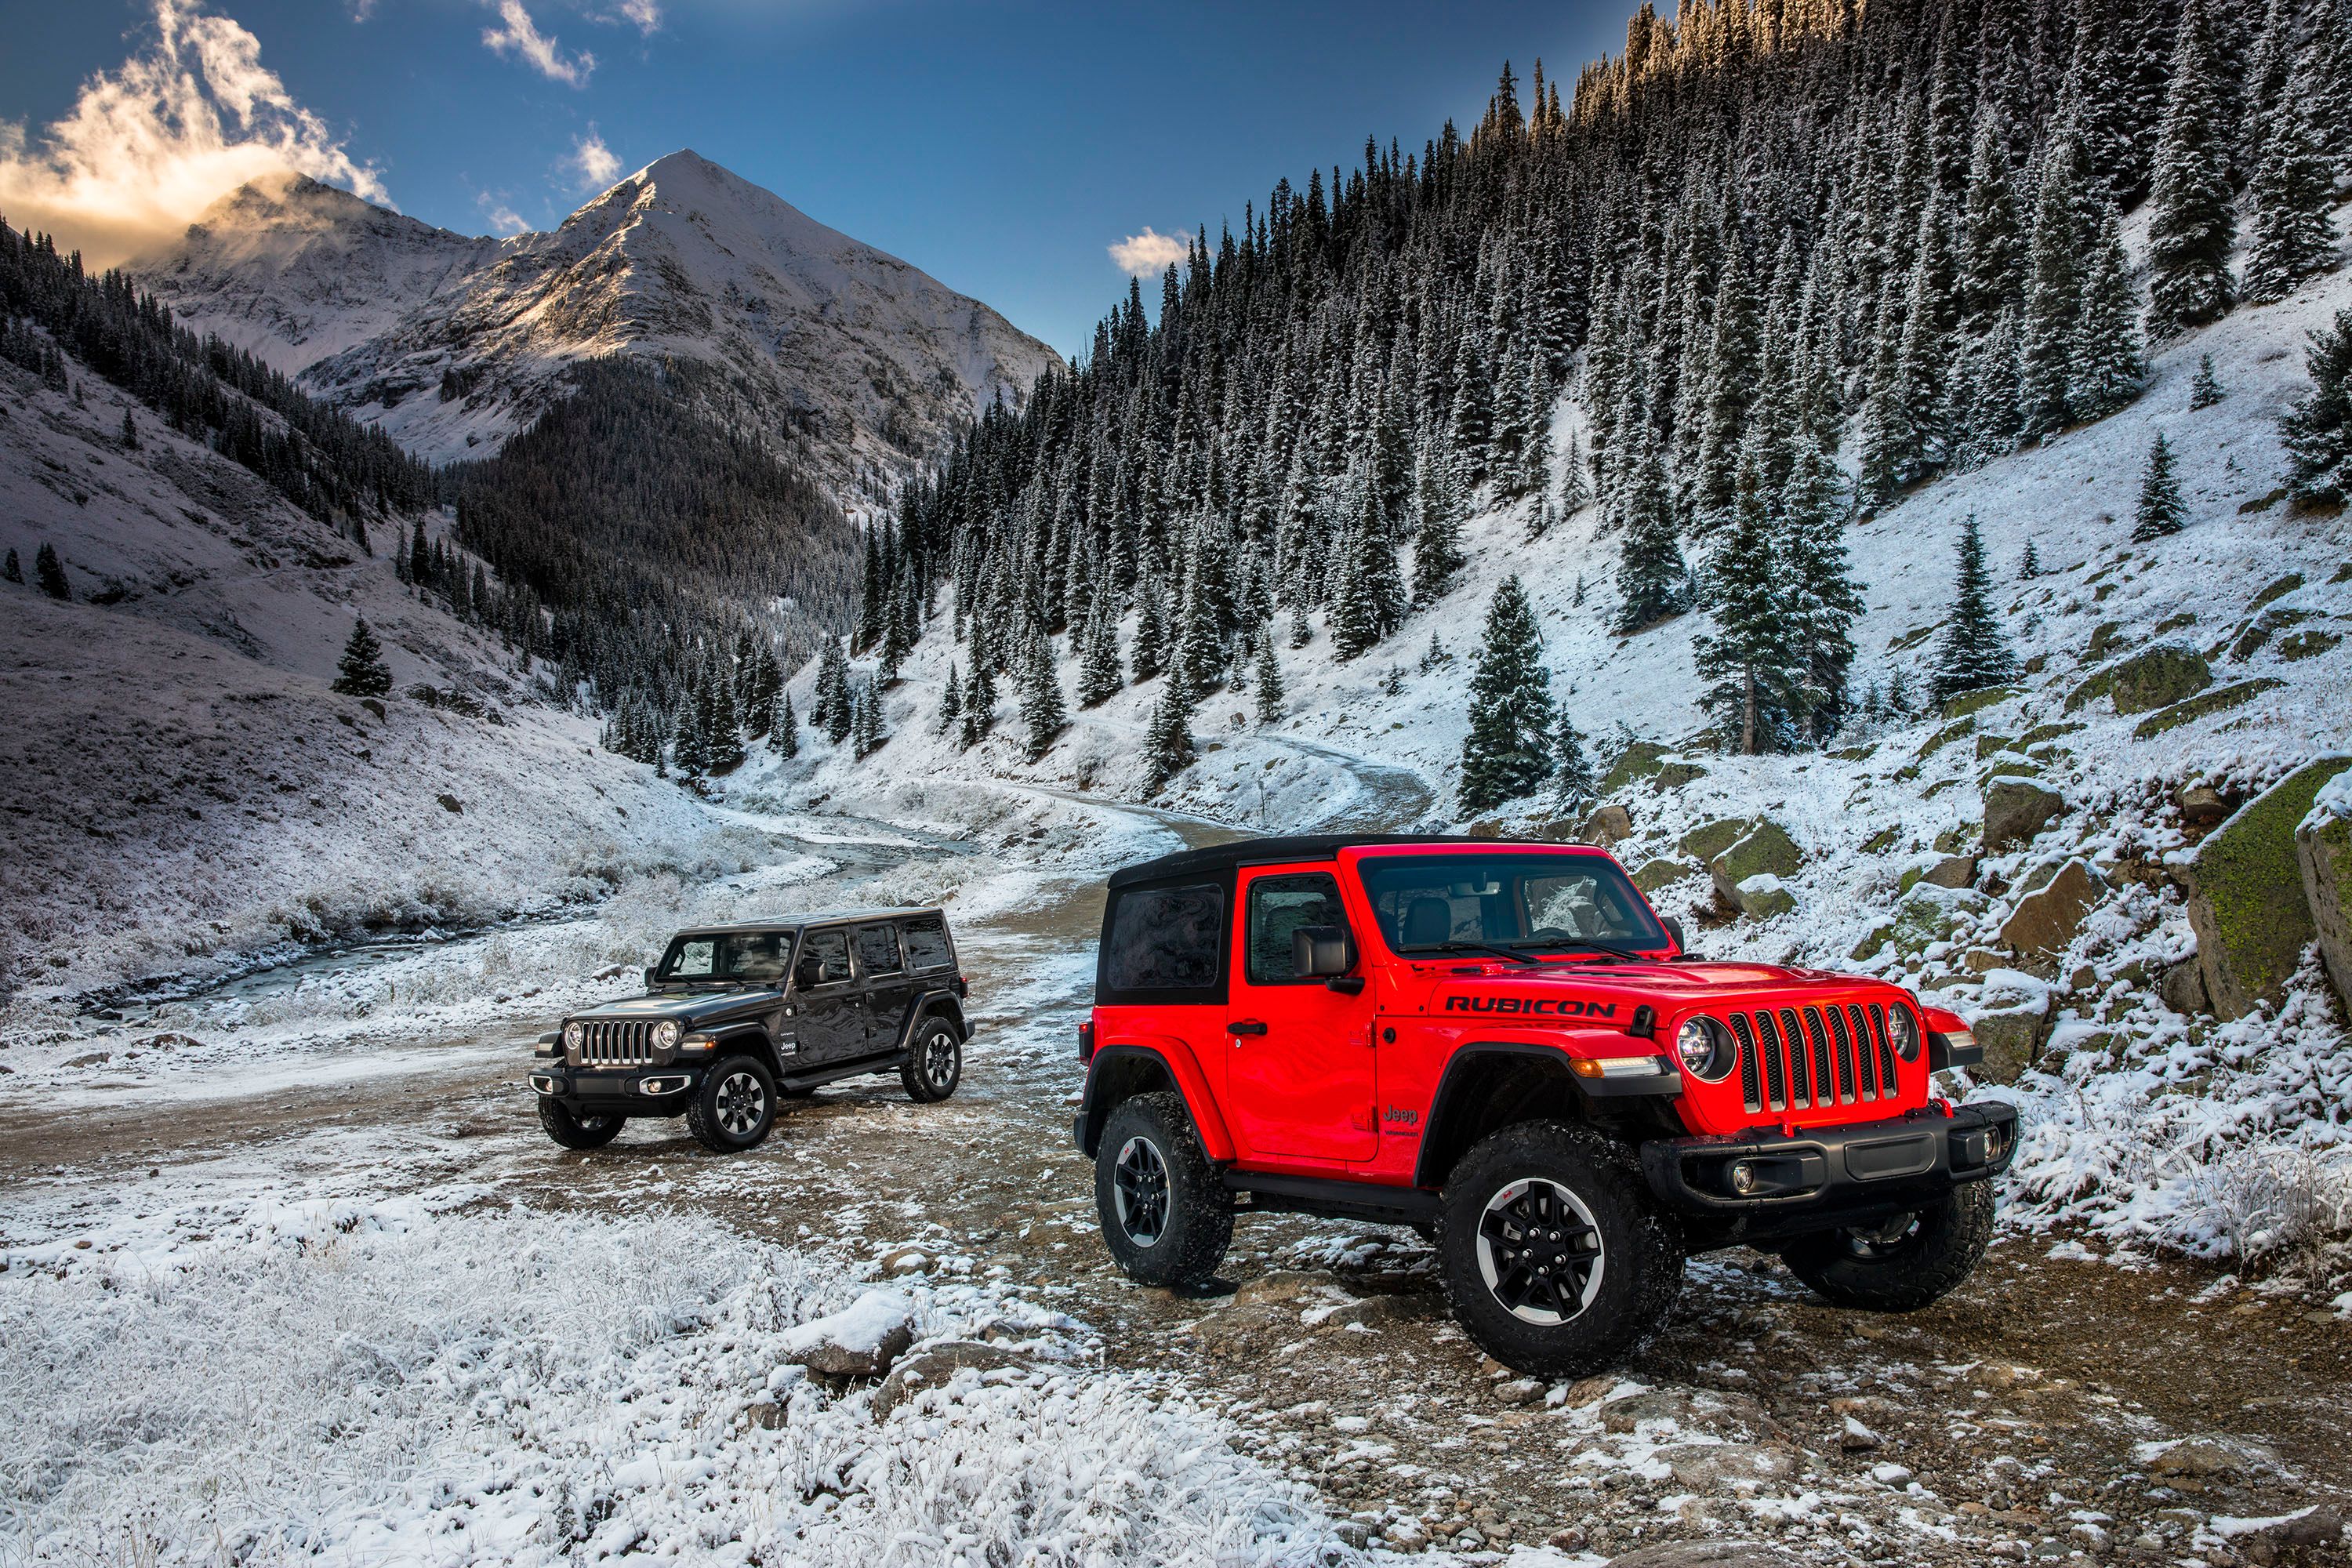 2019 - 2021 Wallpaper of the Day: 2018 Jeep Wrangler JL